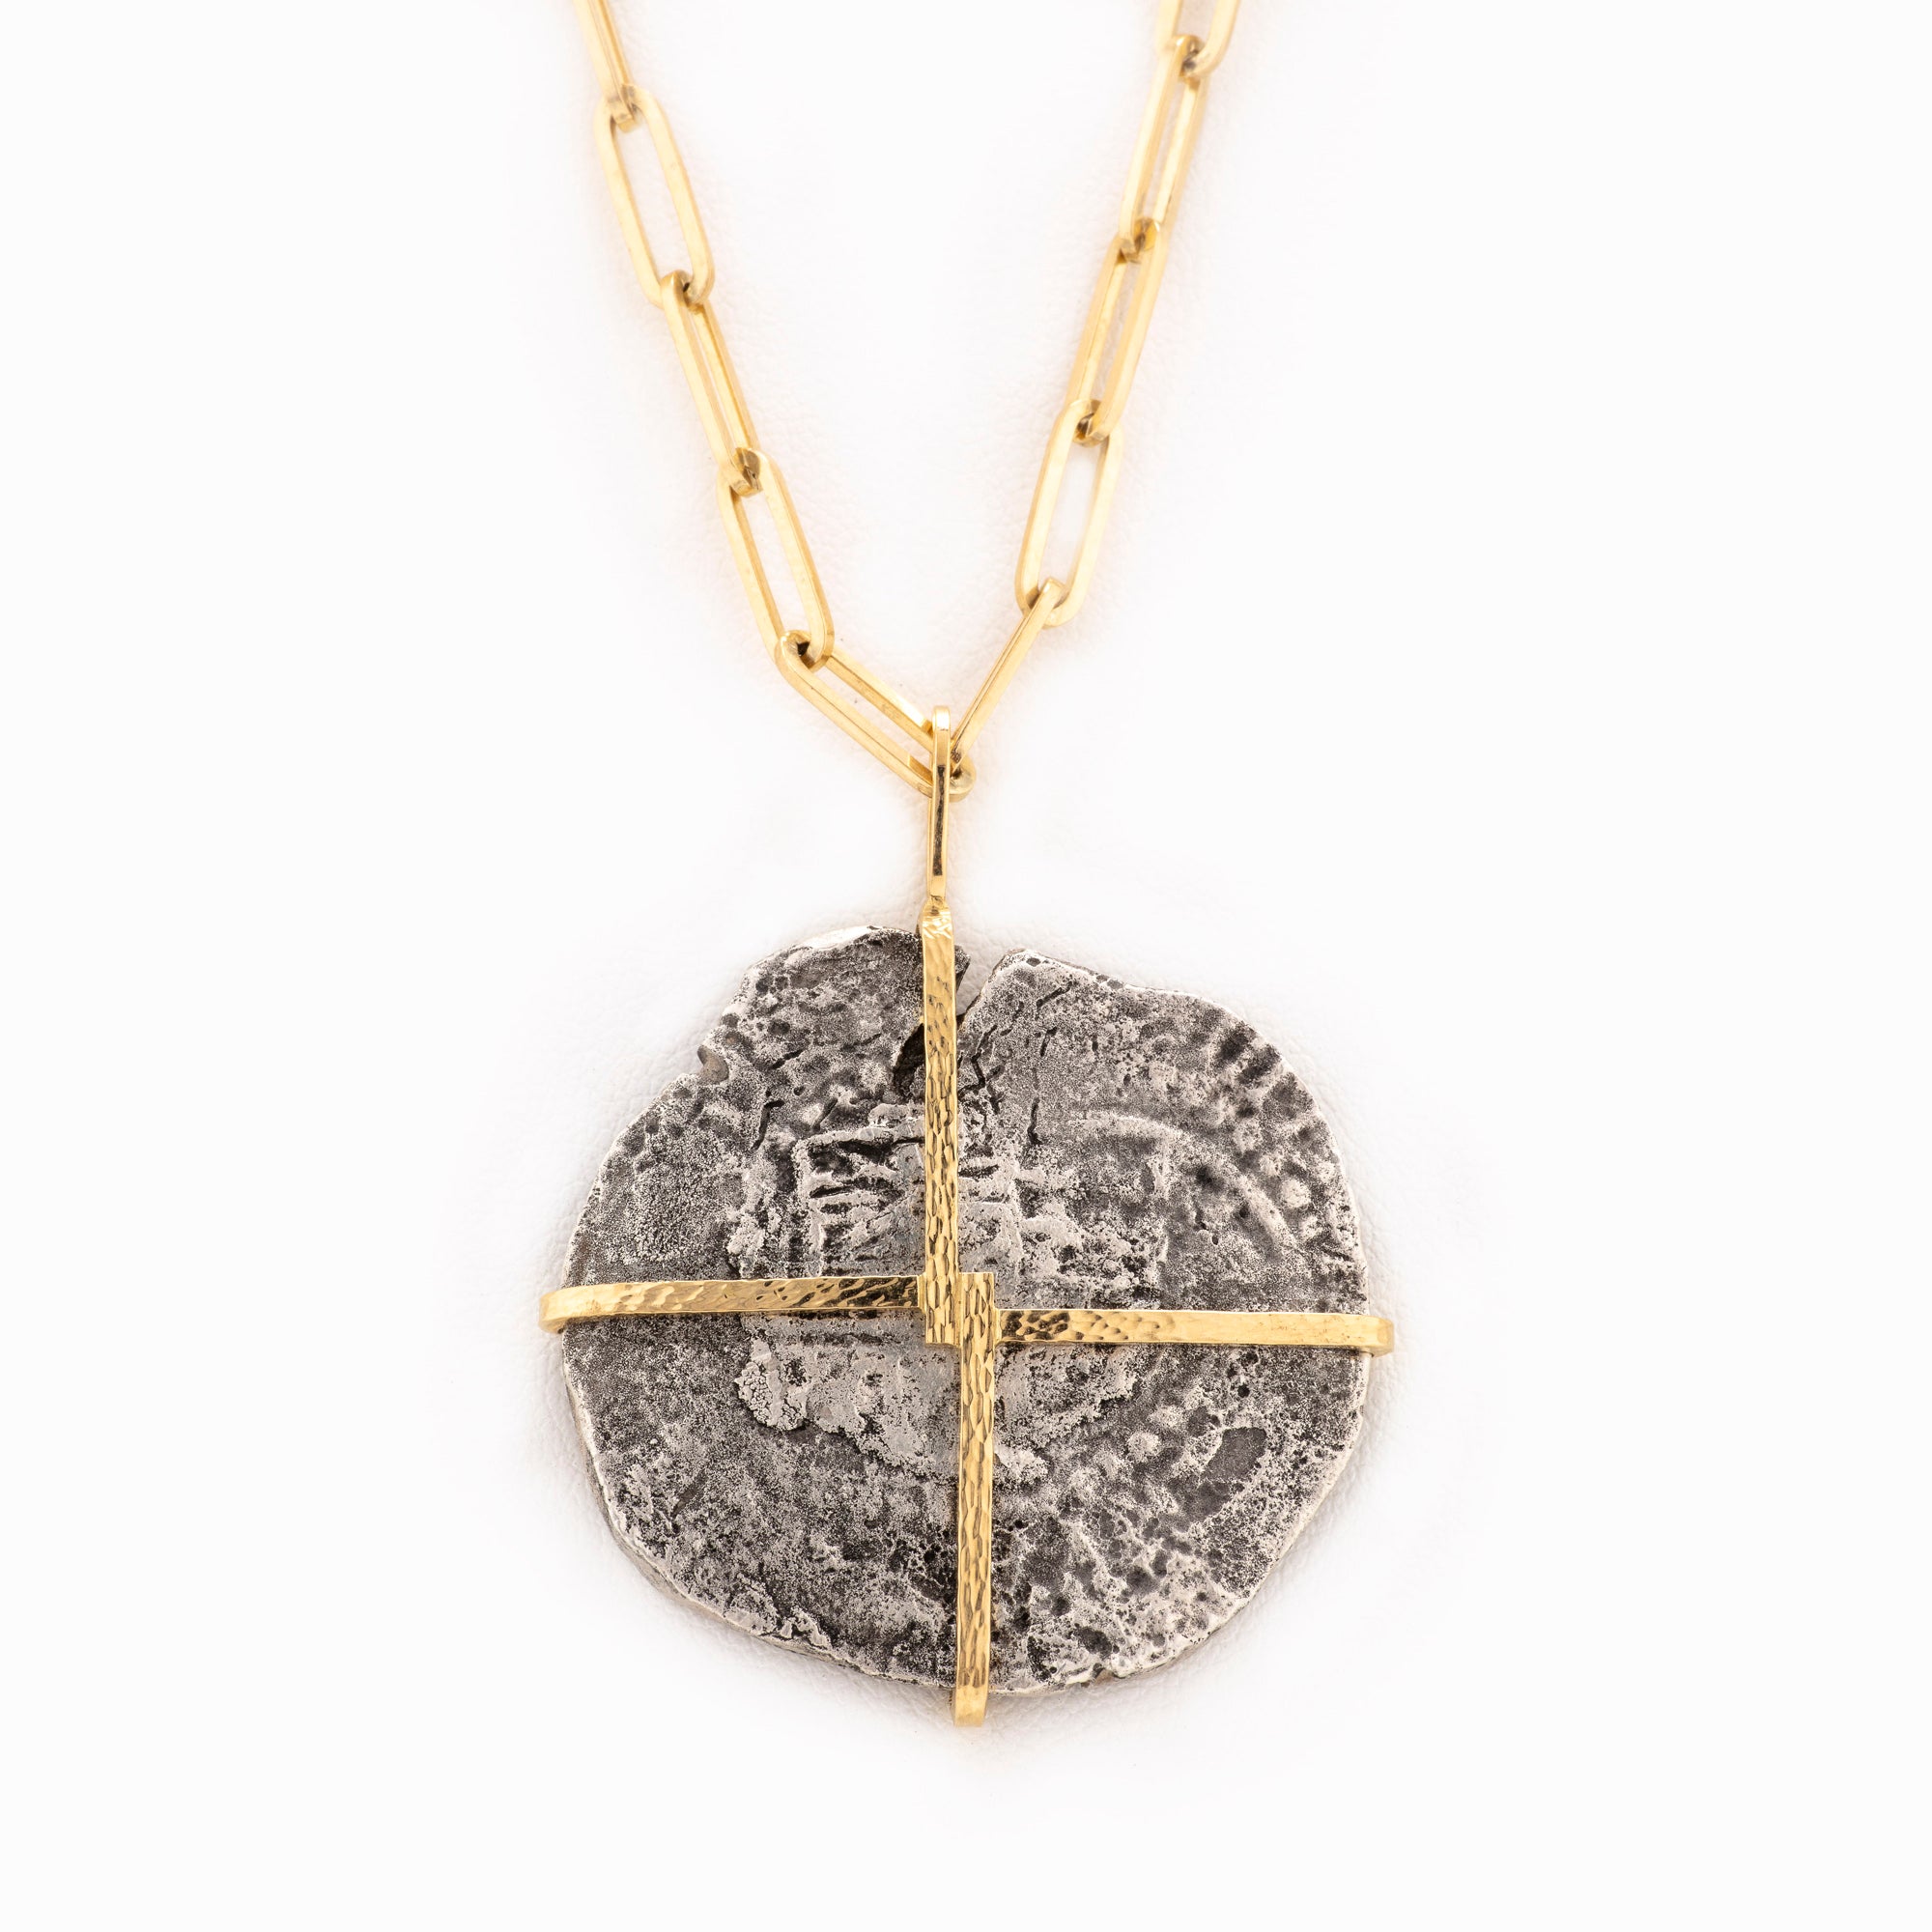 Piece of Eight Pirate Spanish Treasure Coin Pendant +chain Necklace :  ys-Newforch: Amazon.ca: Clothing, Shoes & Accessories